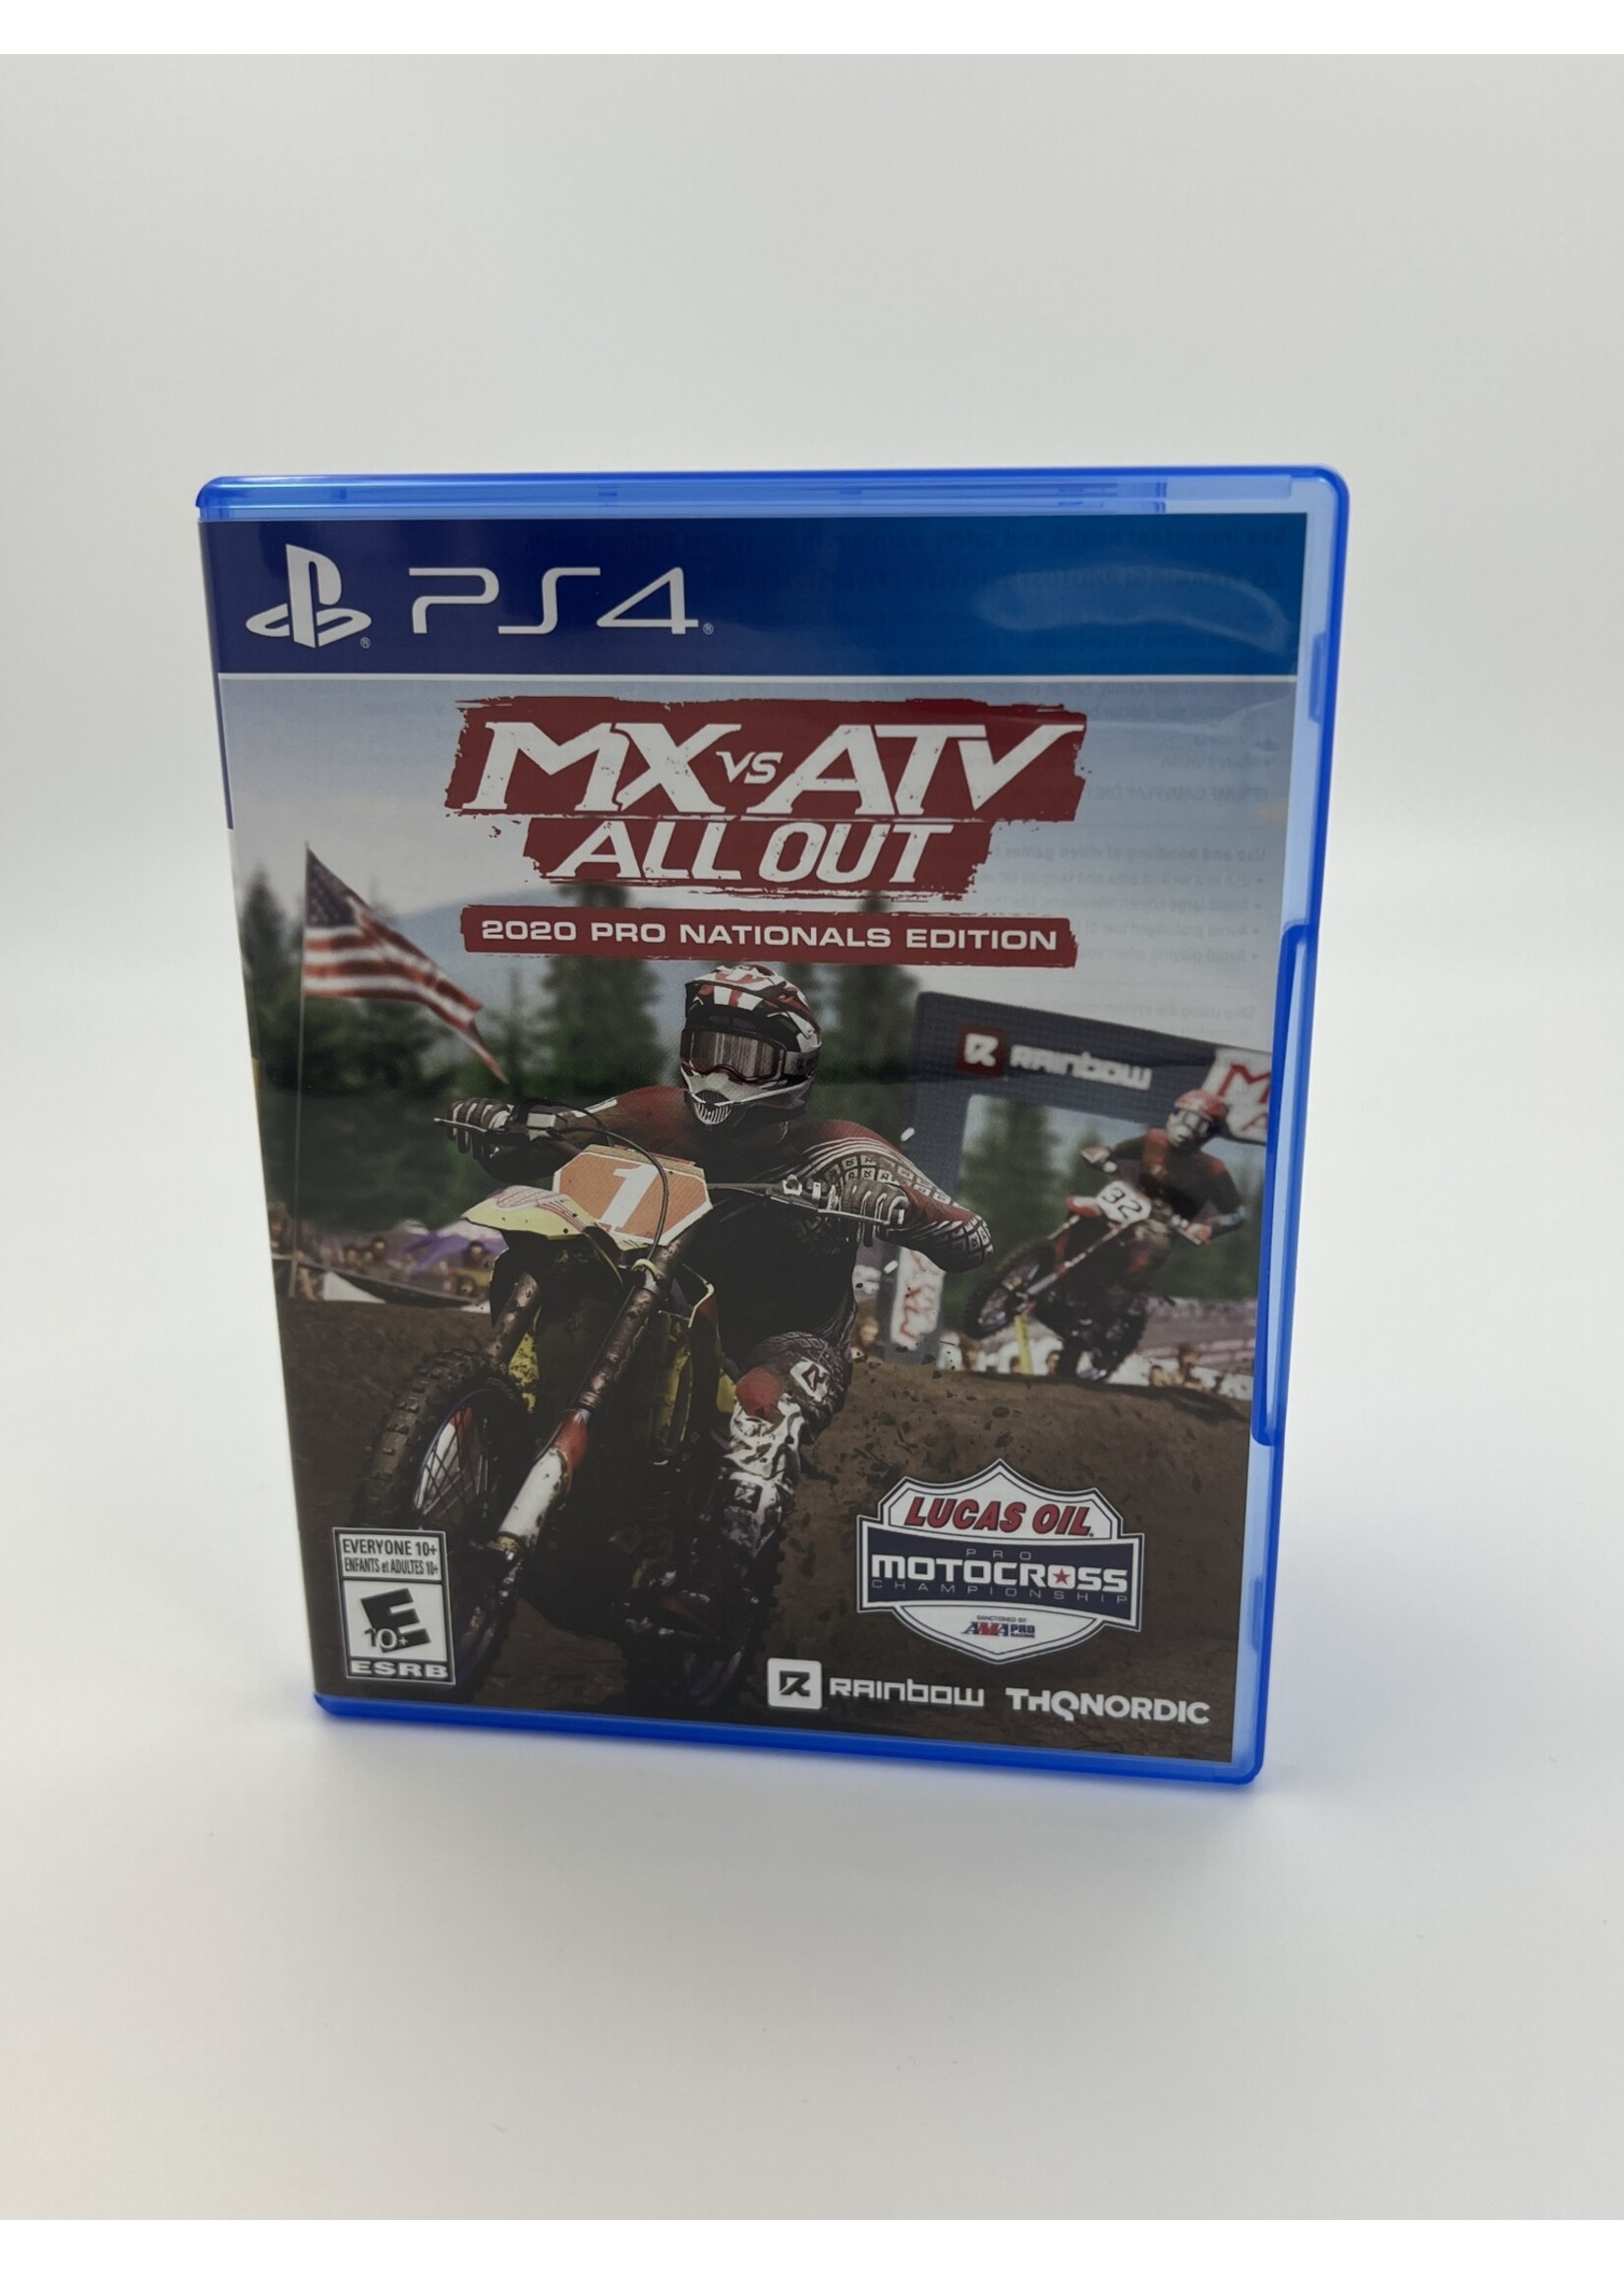 Sony   MX VS ATV All Out 2020 Pro Nationals Edition PS4